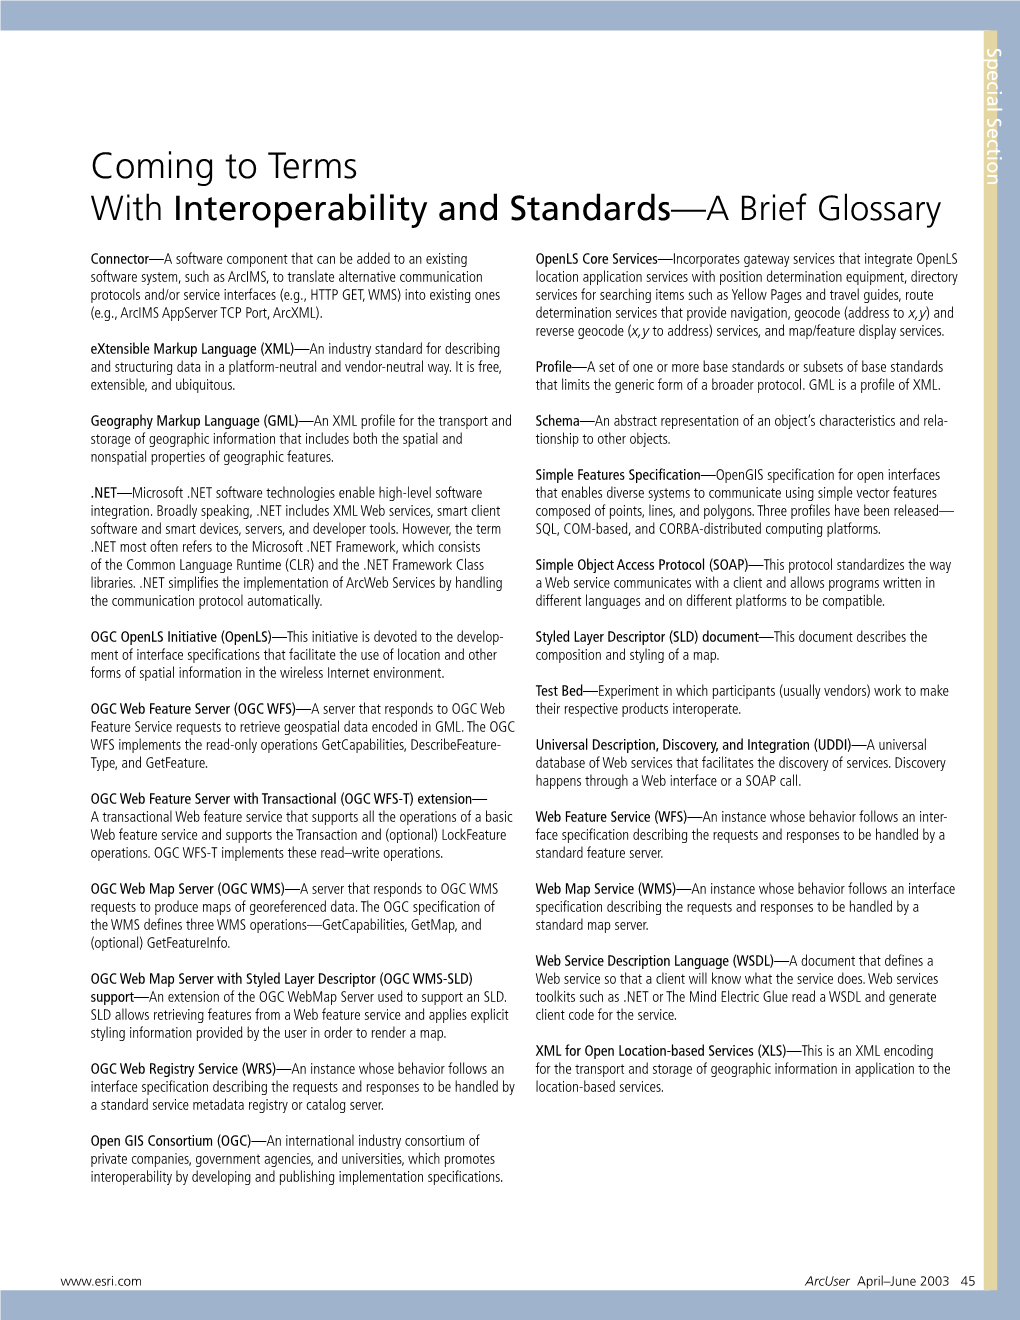 Coming to Terms with Interoperability and Standards—A Brief Glossary